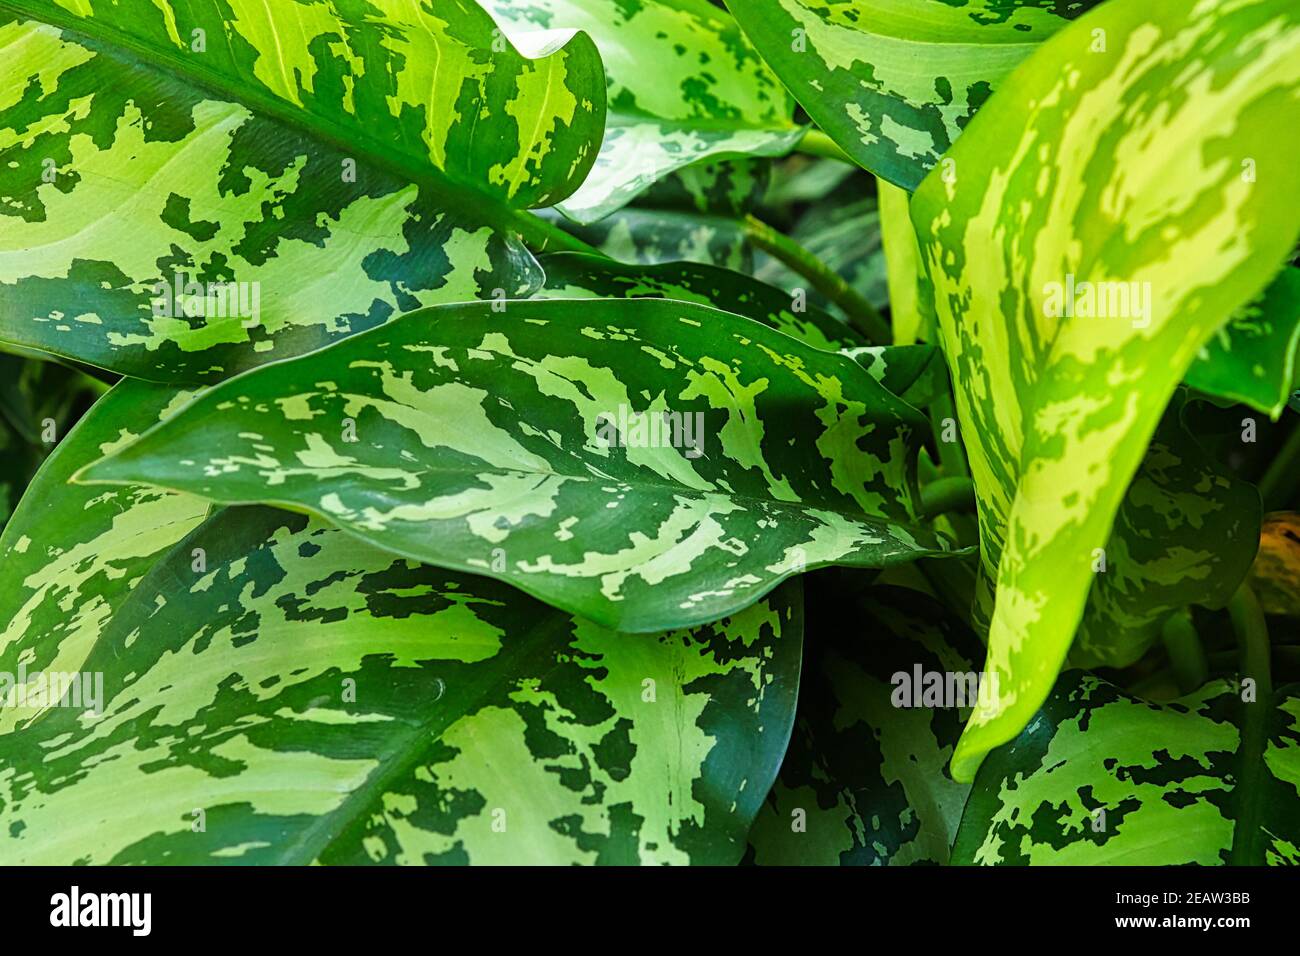 A background of Chinese Evergreen plant leaves Stock Photo